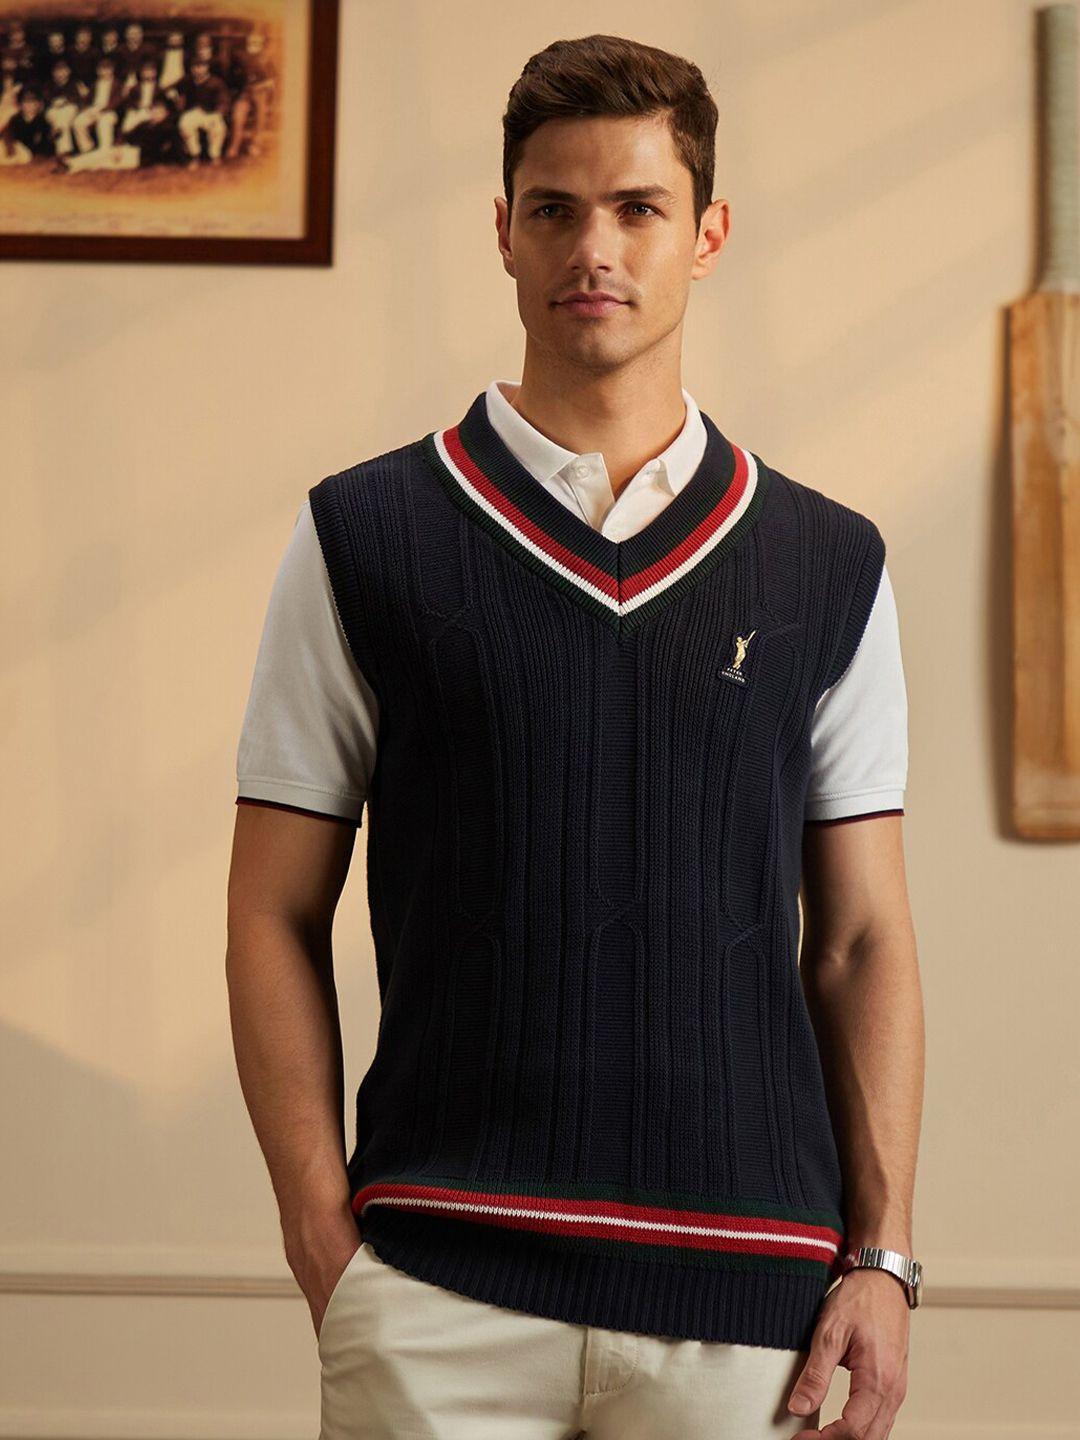 peter england casuals ribbed cricket inspired pure cotton sweater vest